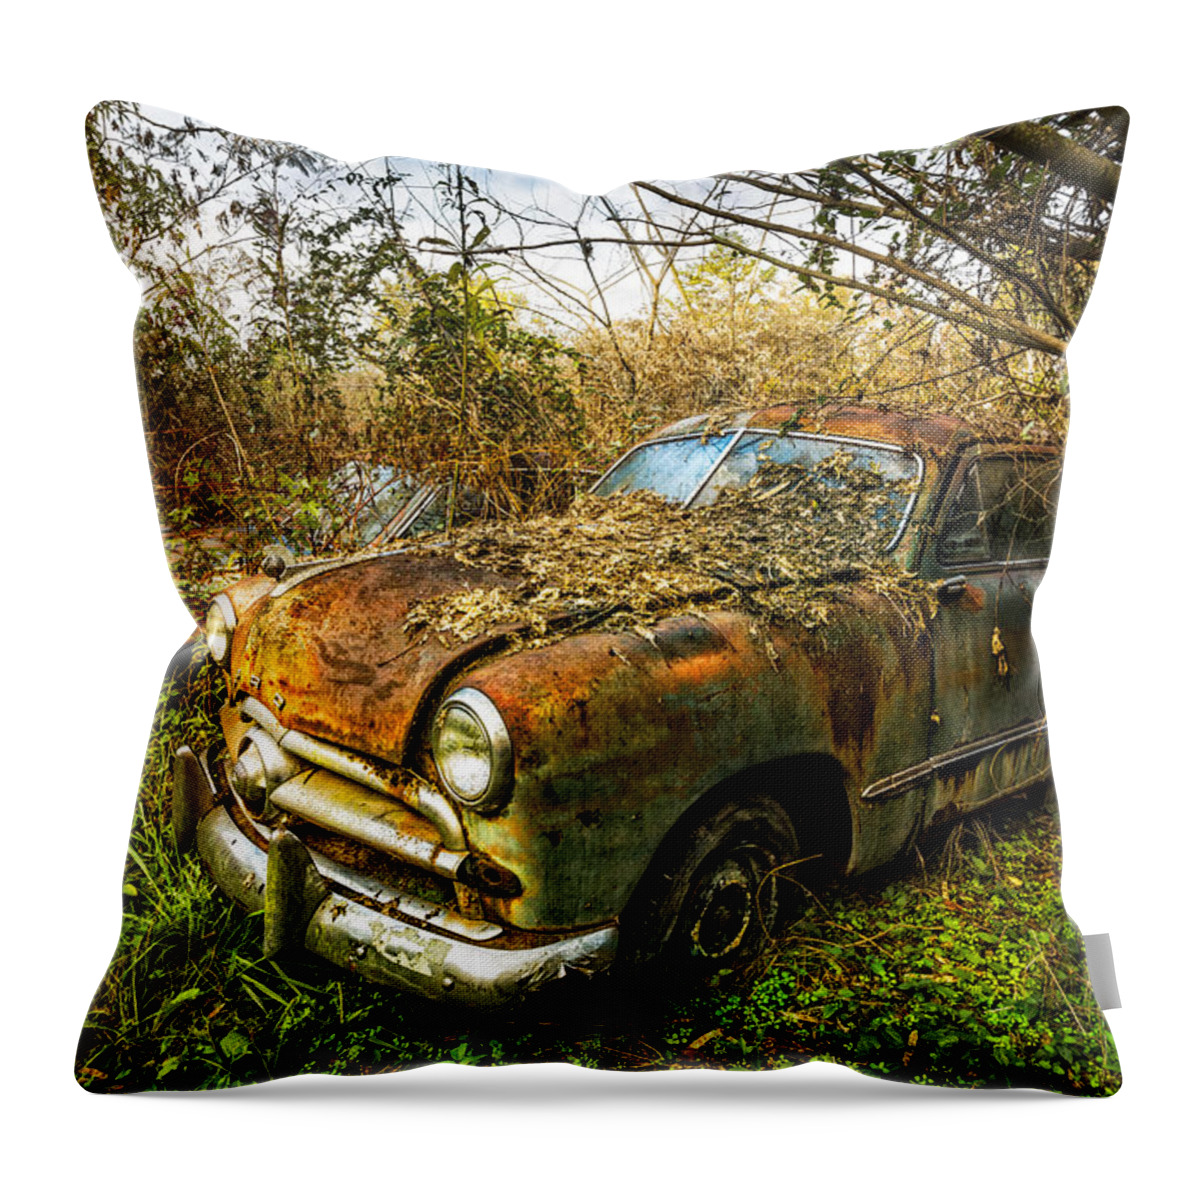 1940s Throw Pillow featuring the photograph 1949 Ford #2 by Debra and Dave Vanderlaan